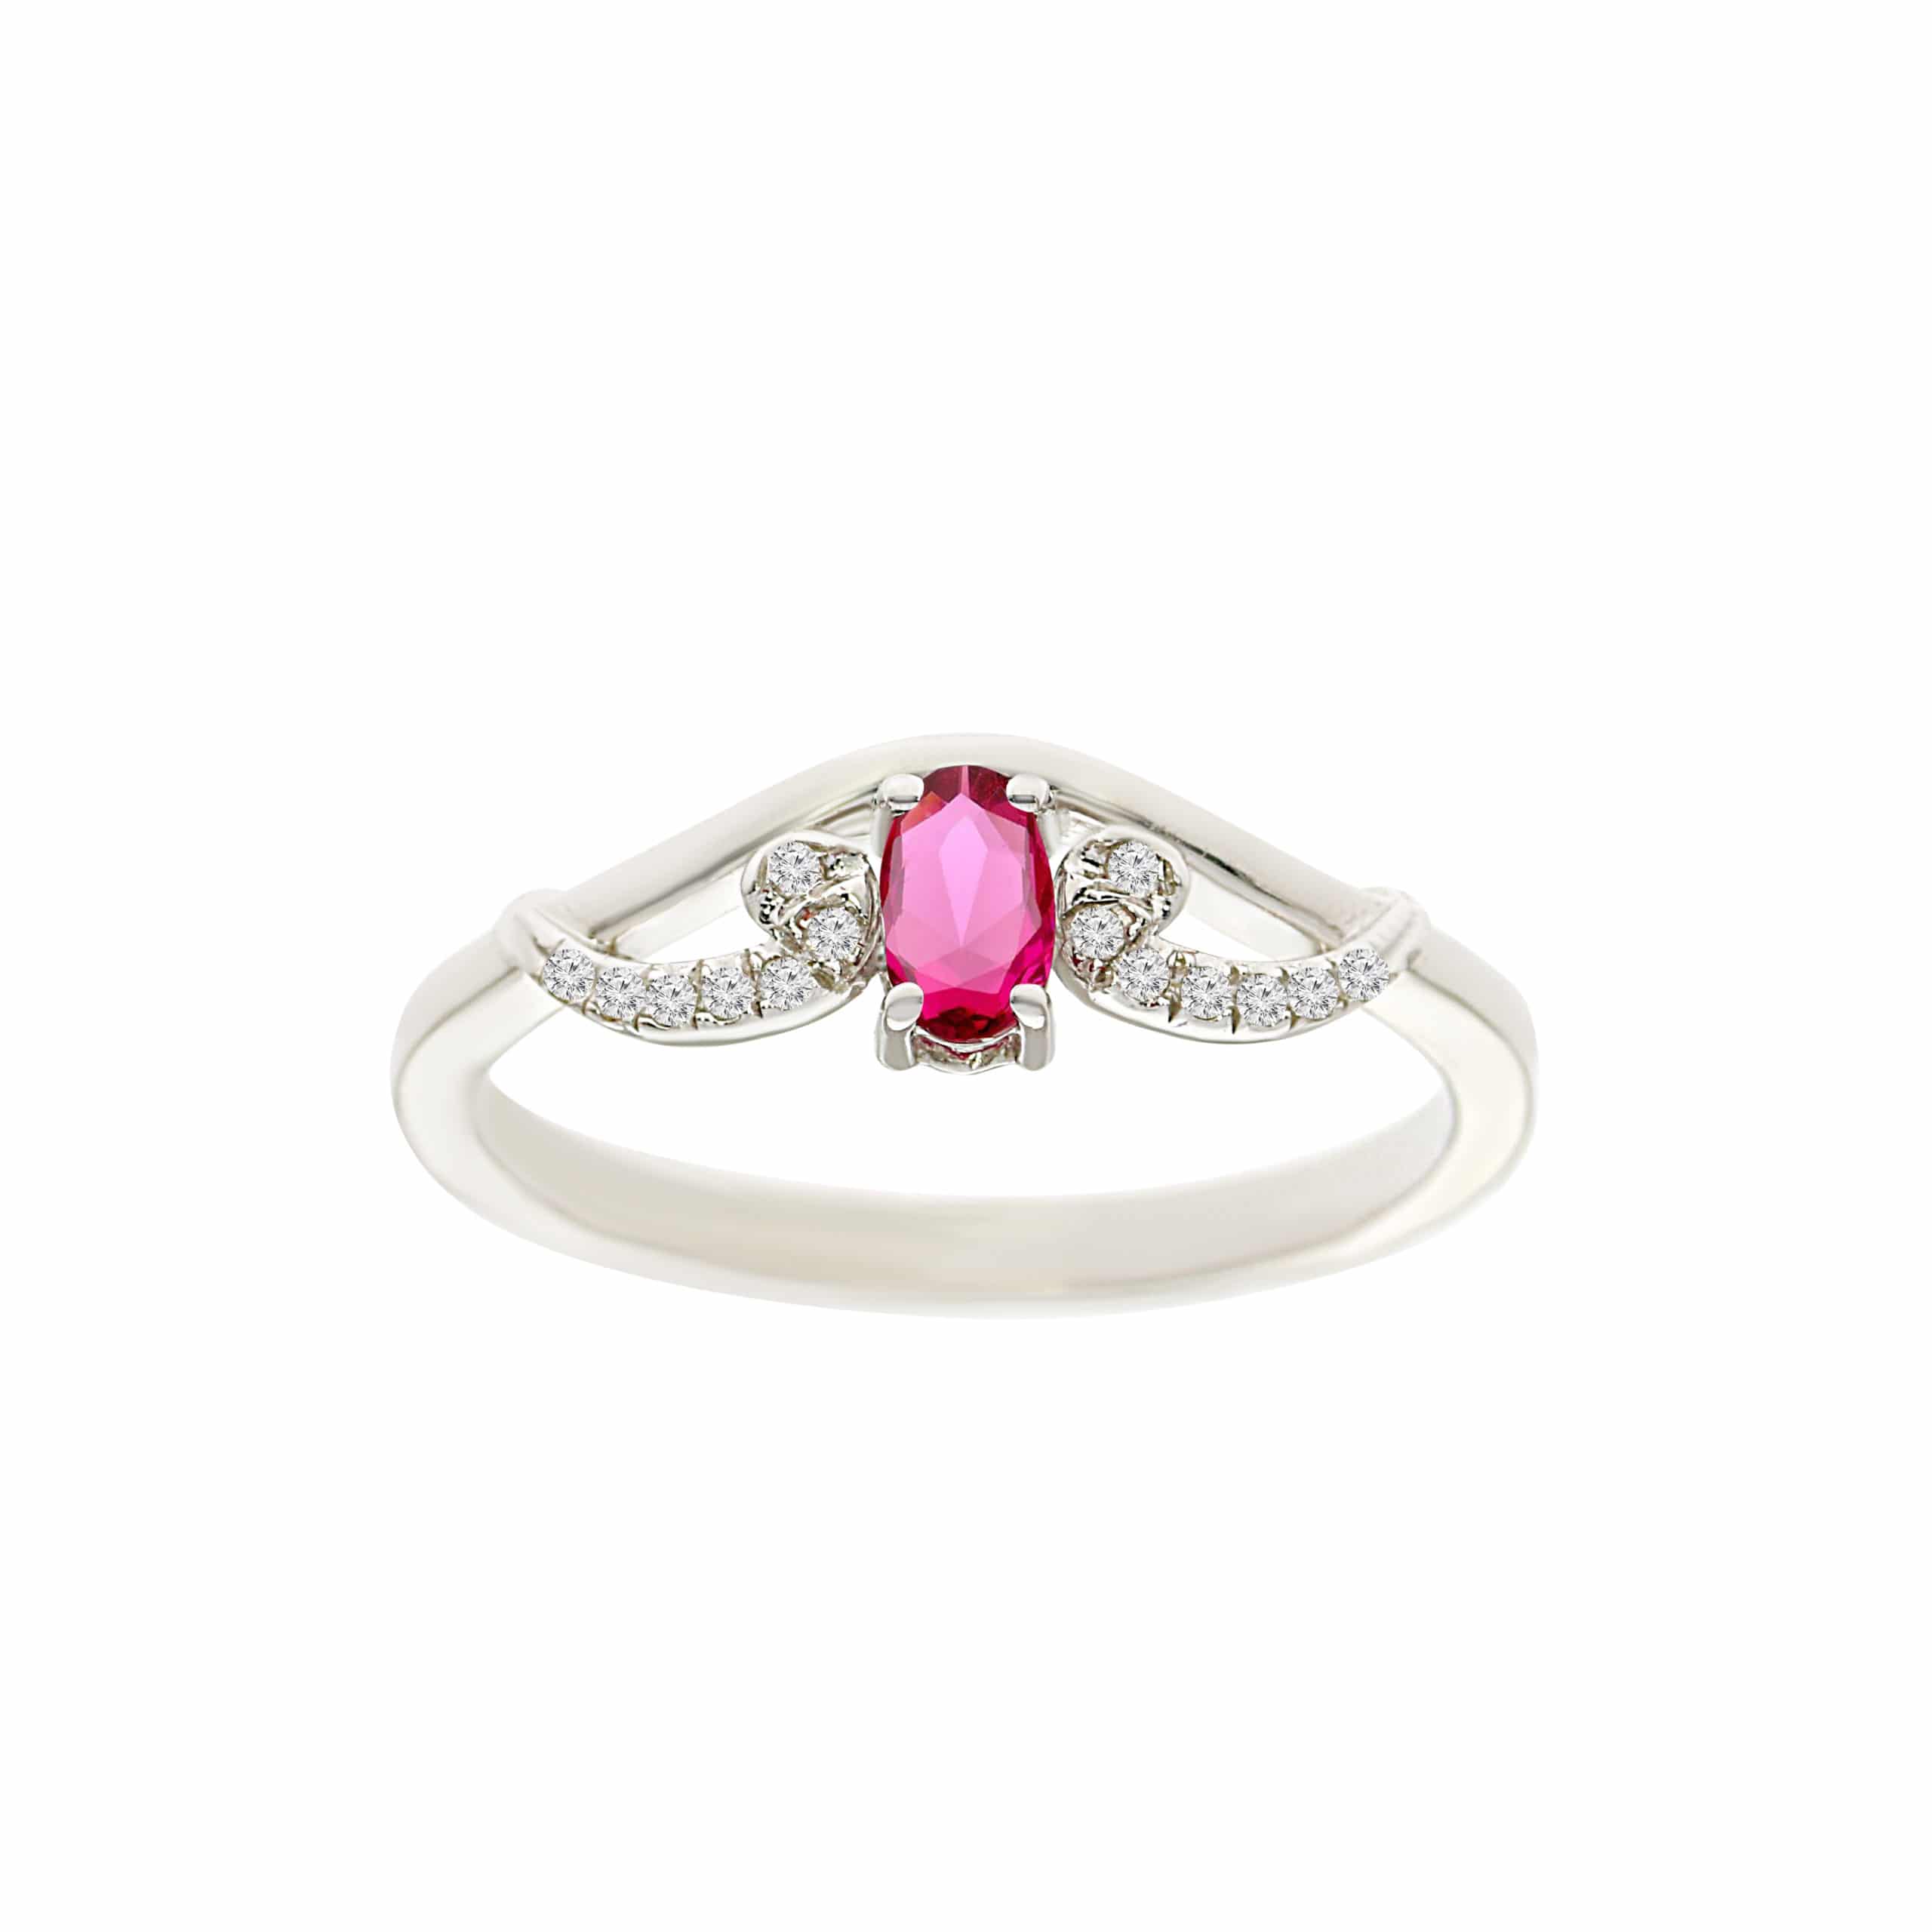 0.27ct Ruby and Diamonds Ring, 14K White Gold